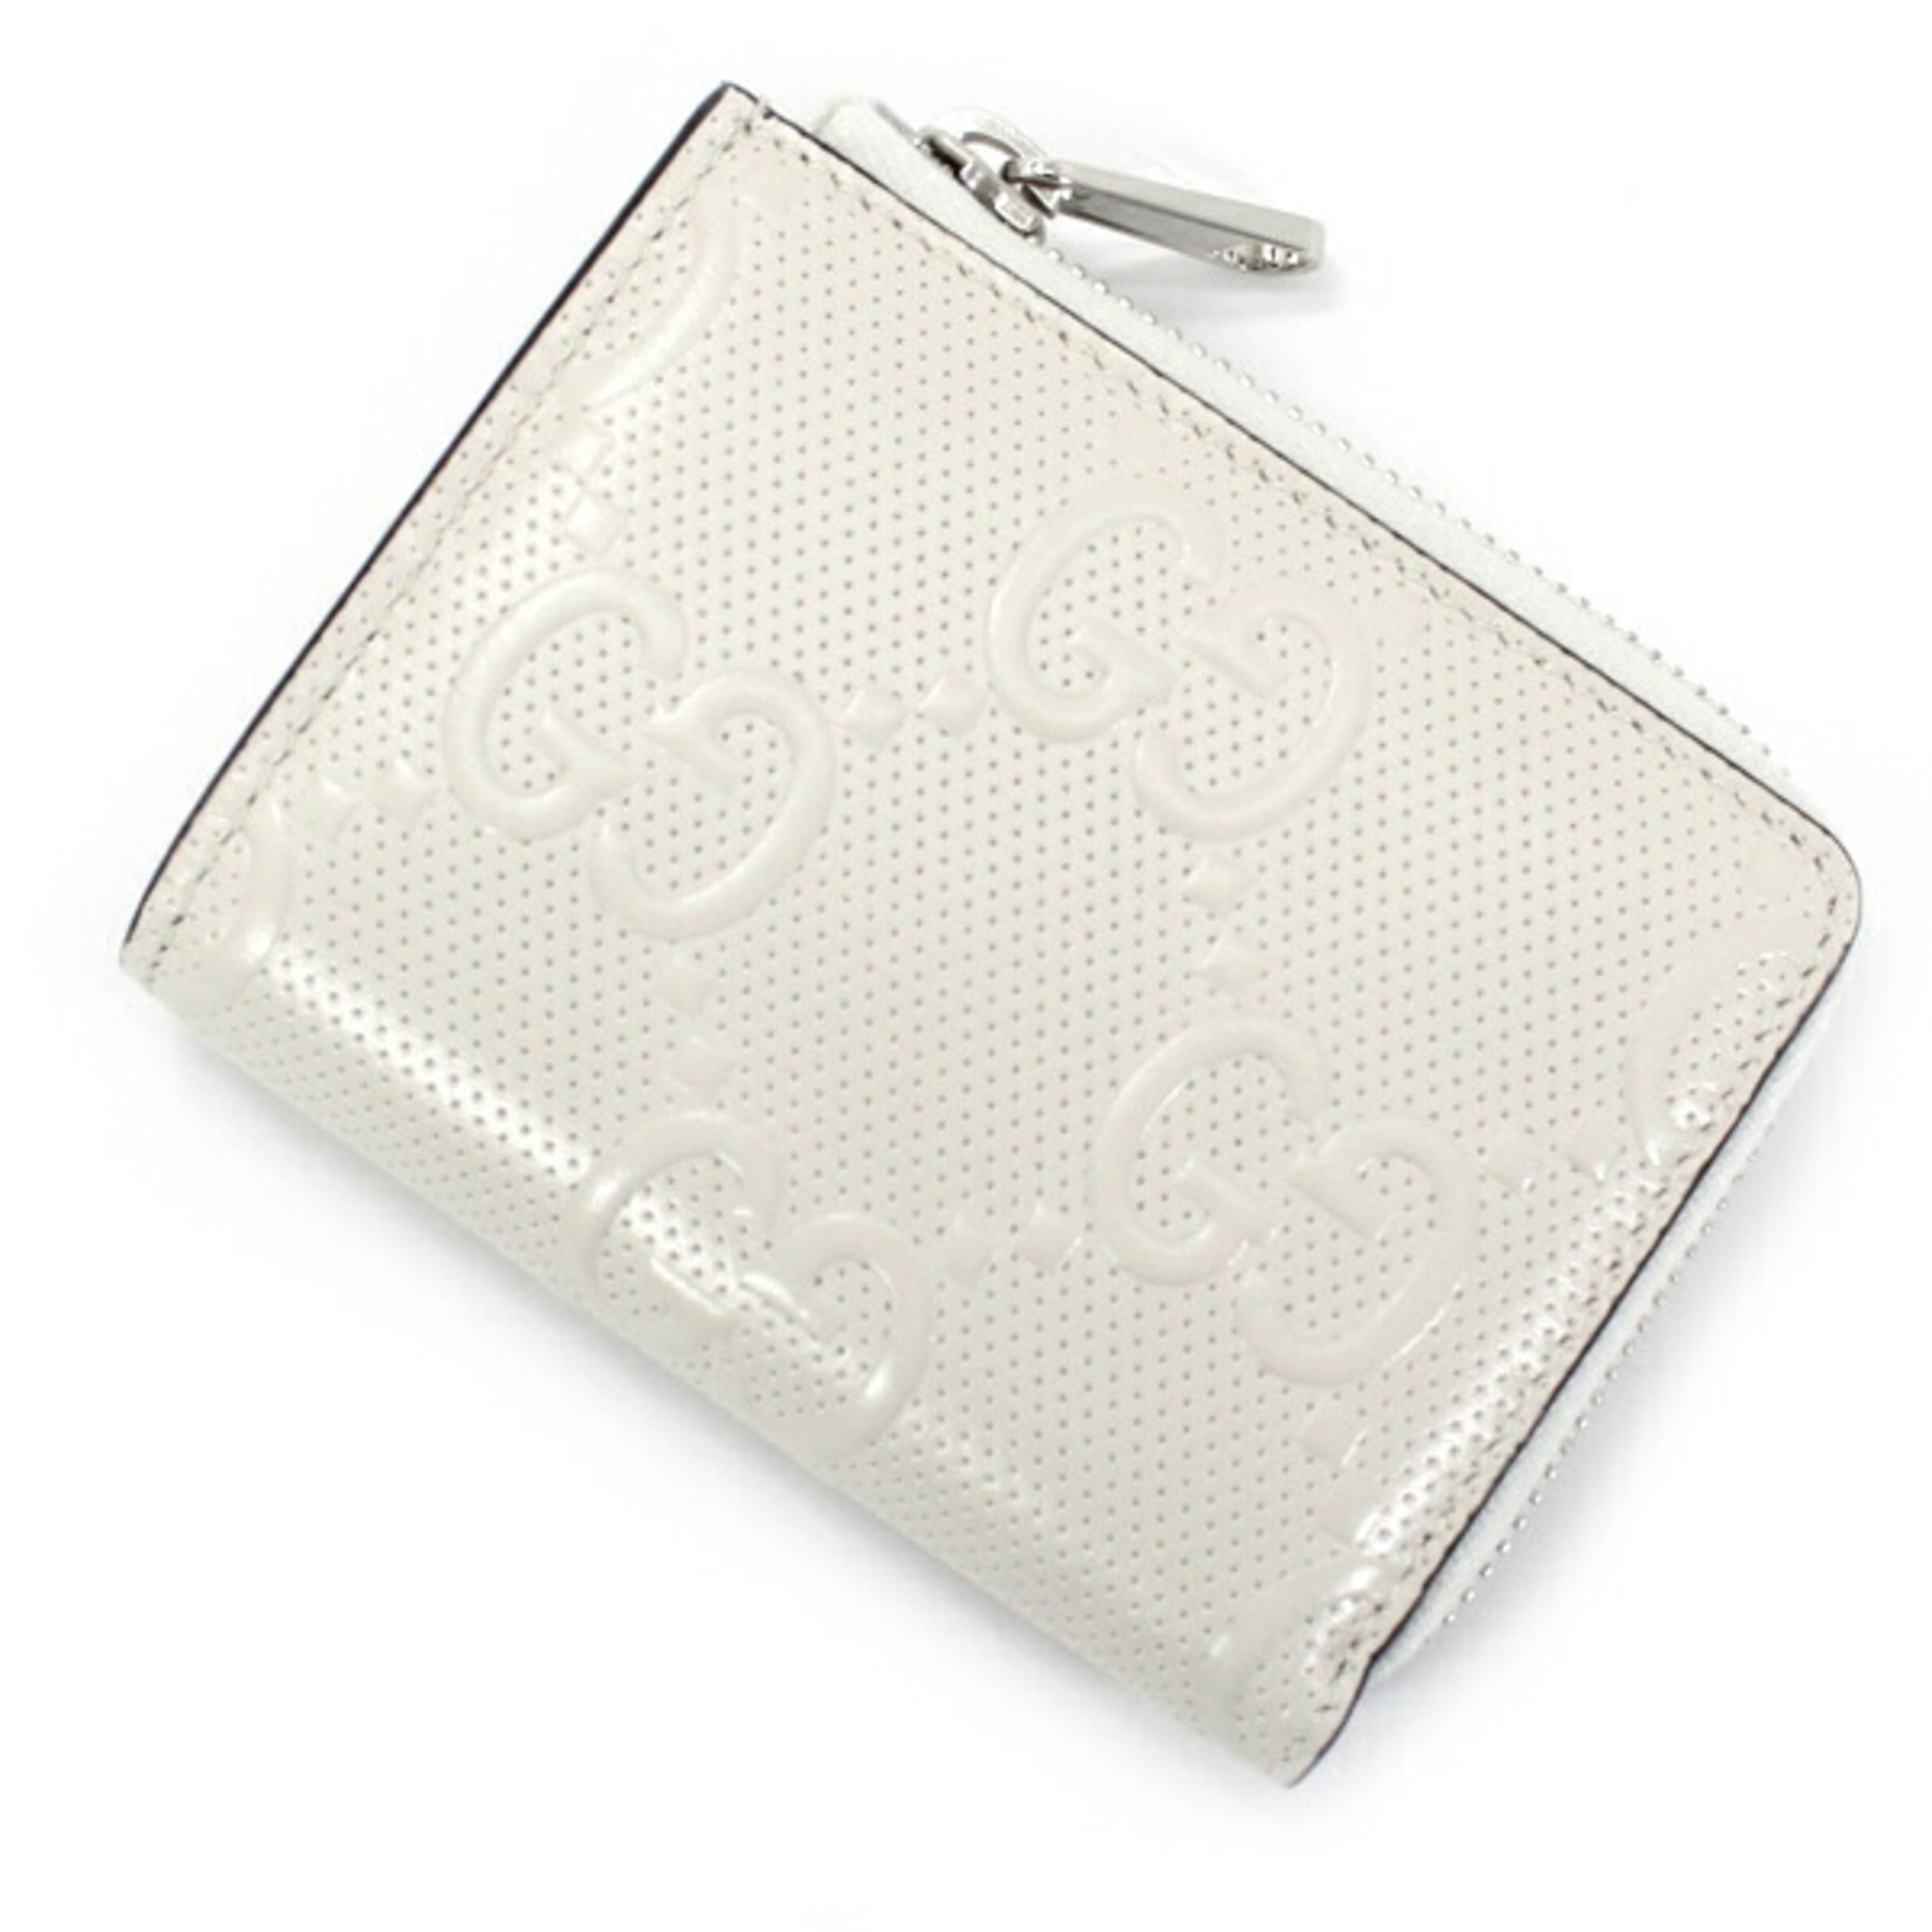 Gucci Coin Case Wallet GG Embossed Leather White Purse 657571 Men's Women's GUCCI L-shaped Zippy Compact T4811